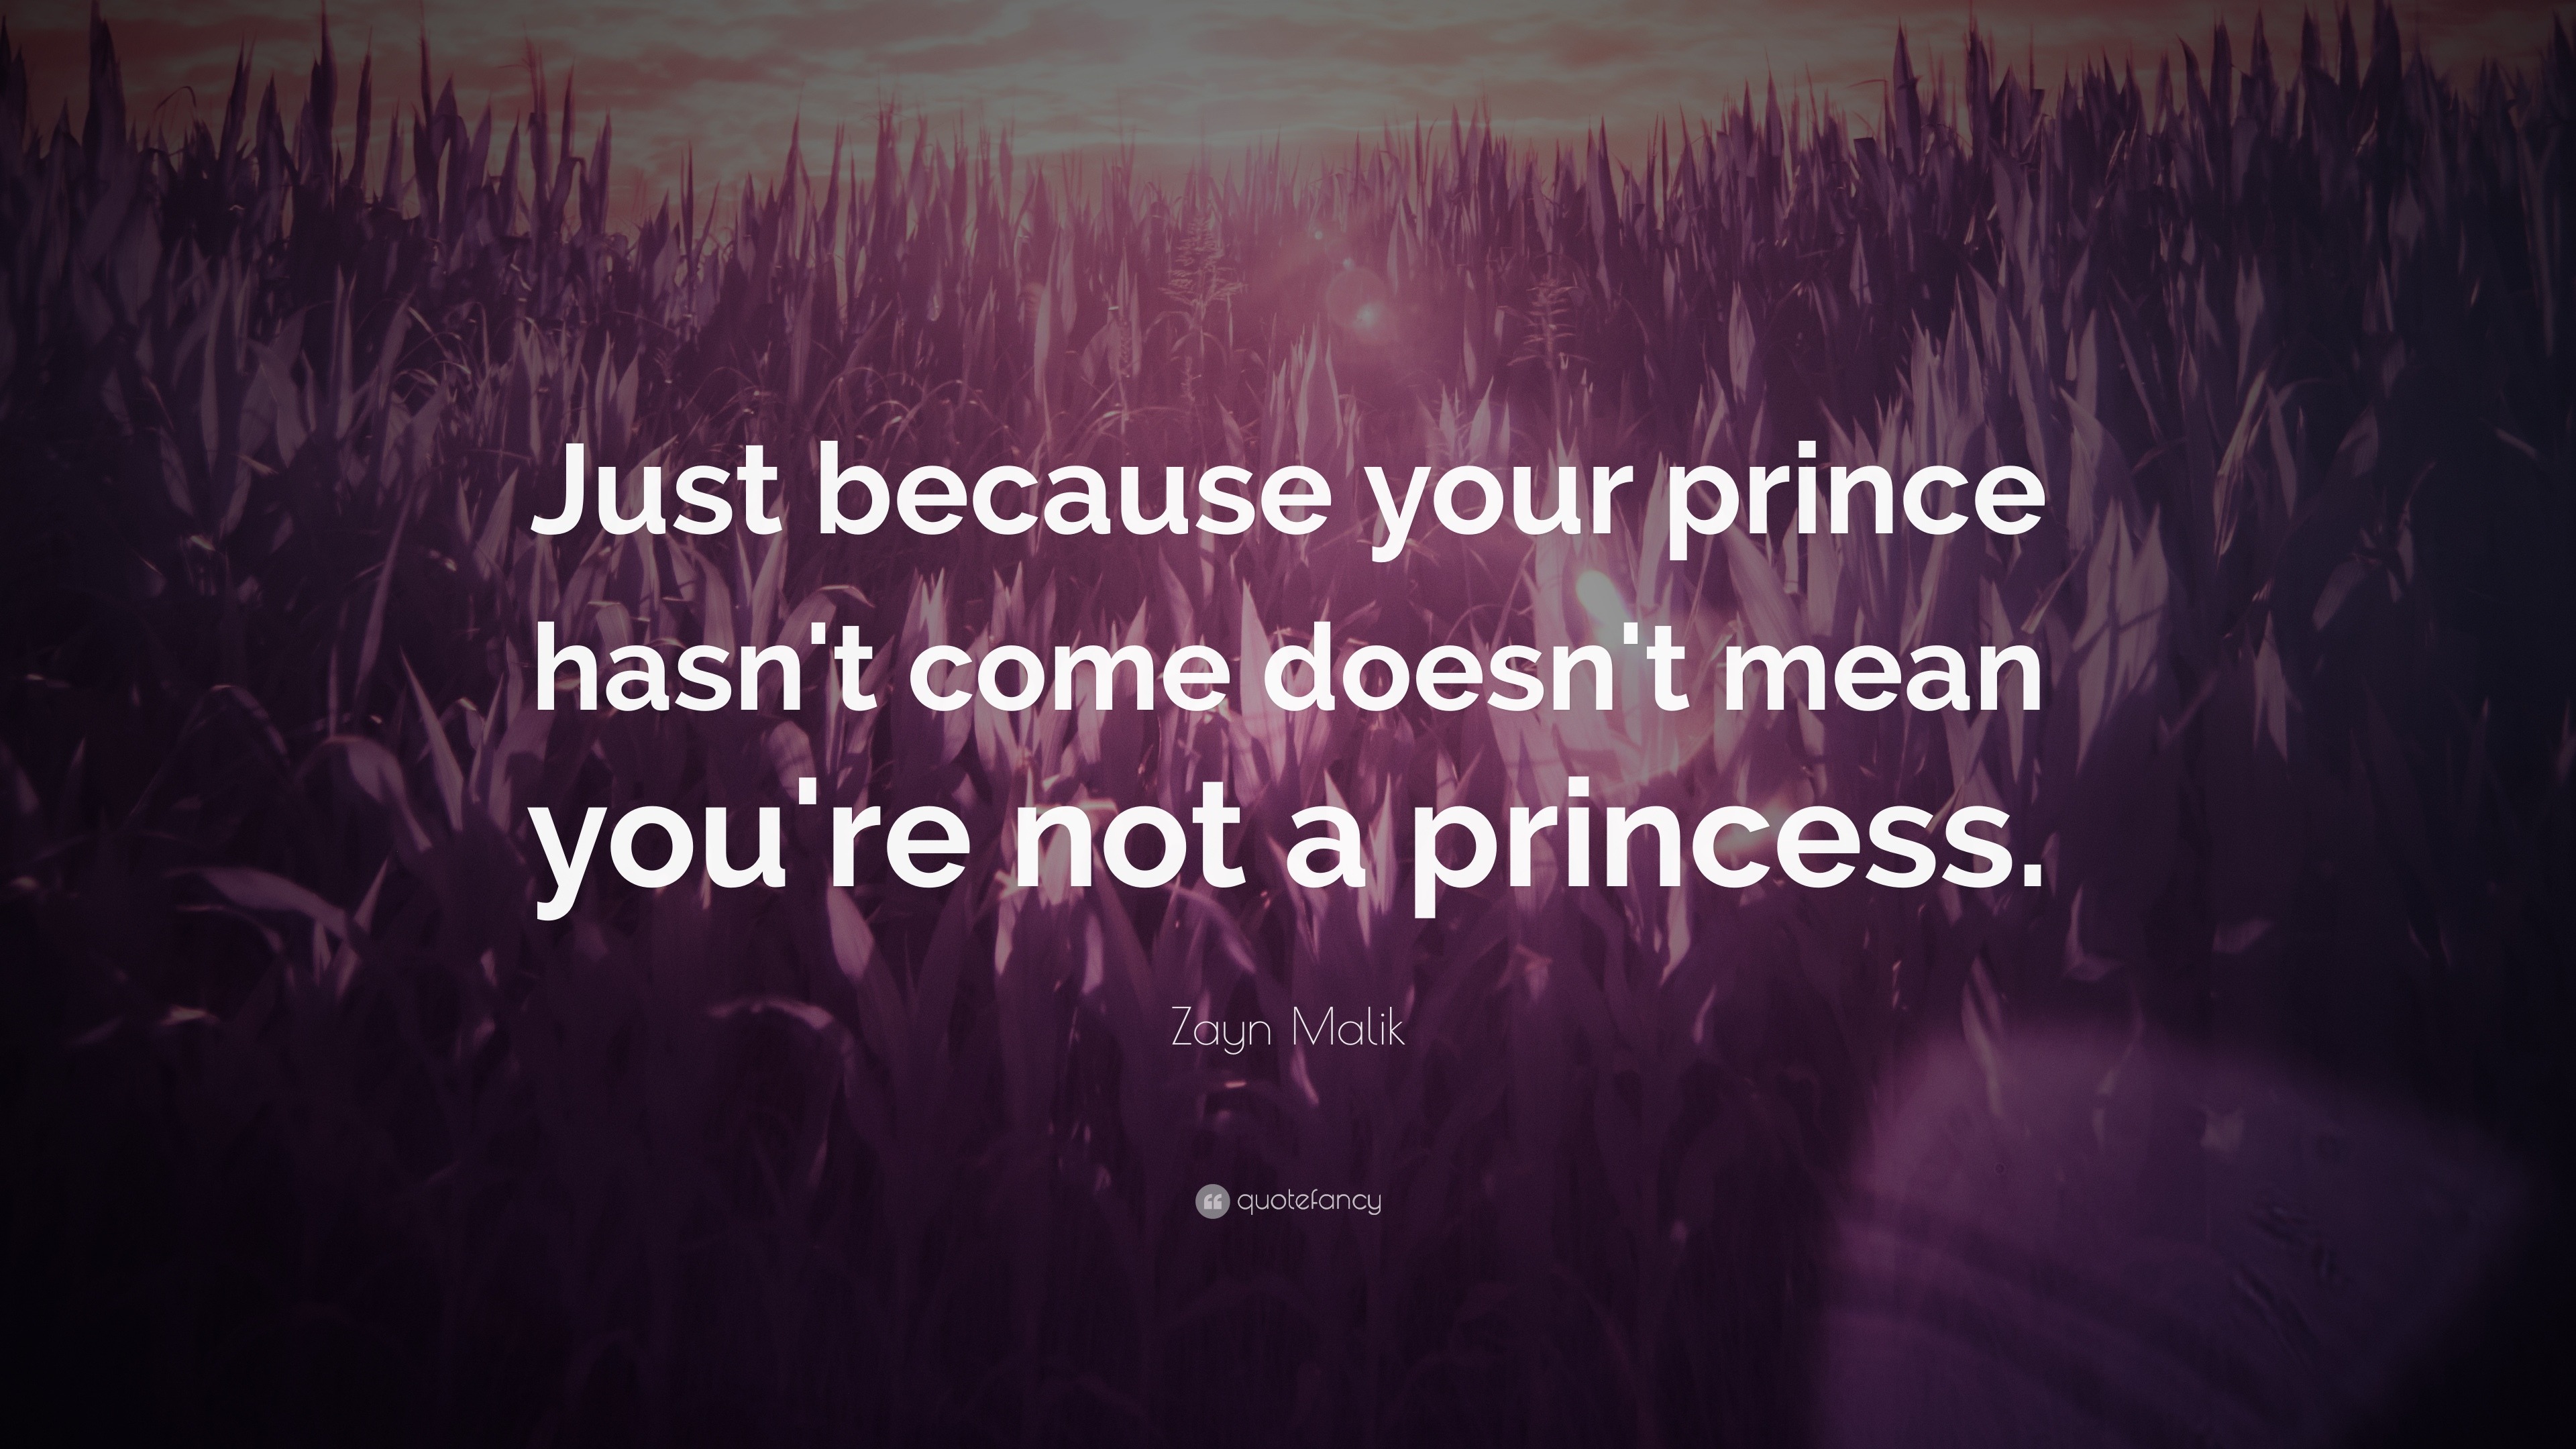 Zayn Malik Quote: “Just because your prince hasn't come doesn't mean ...